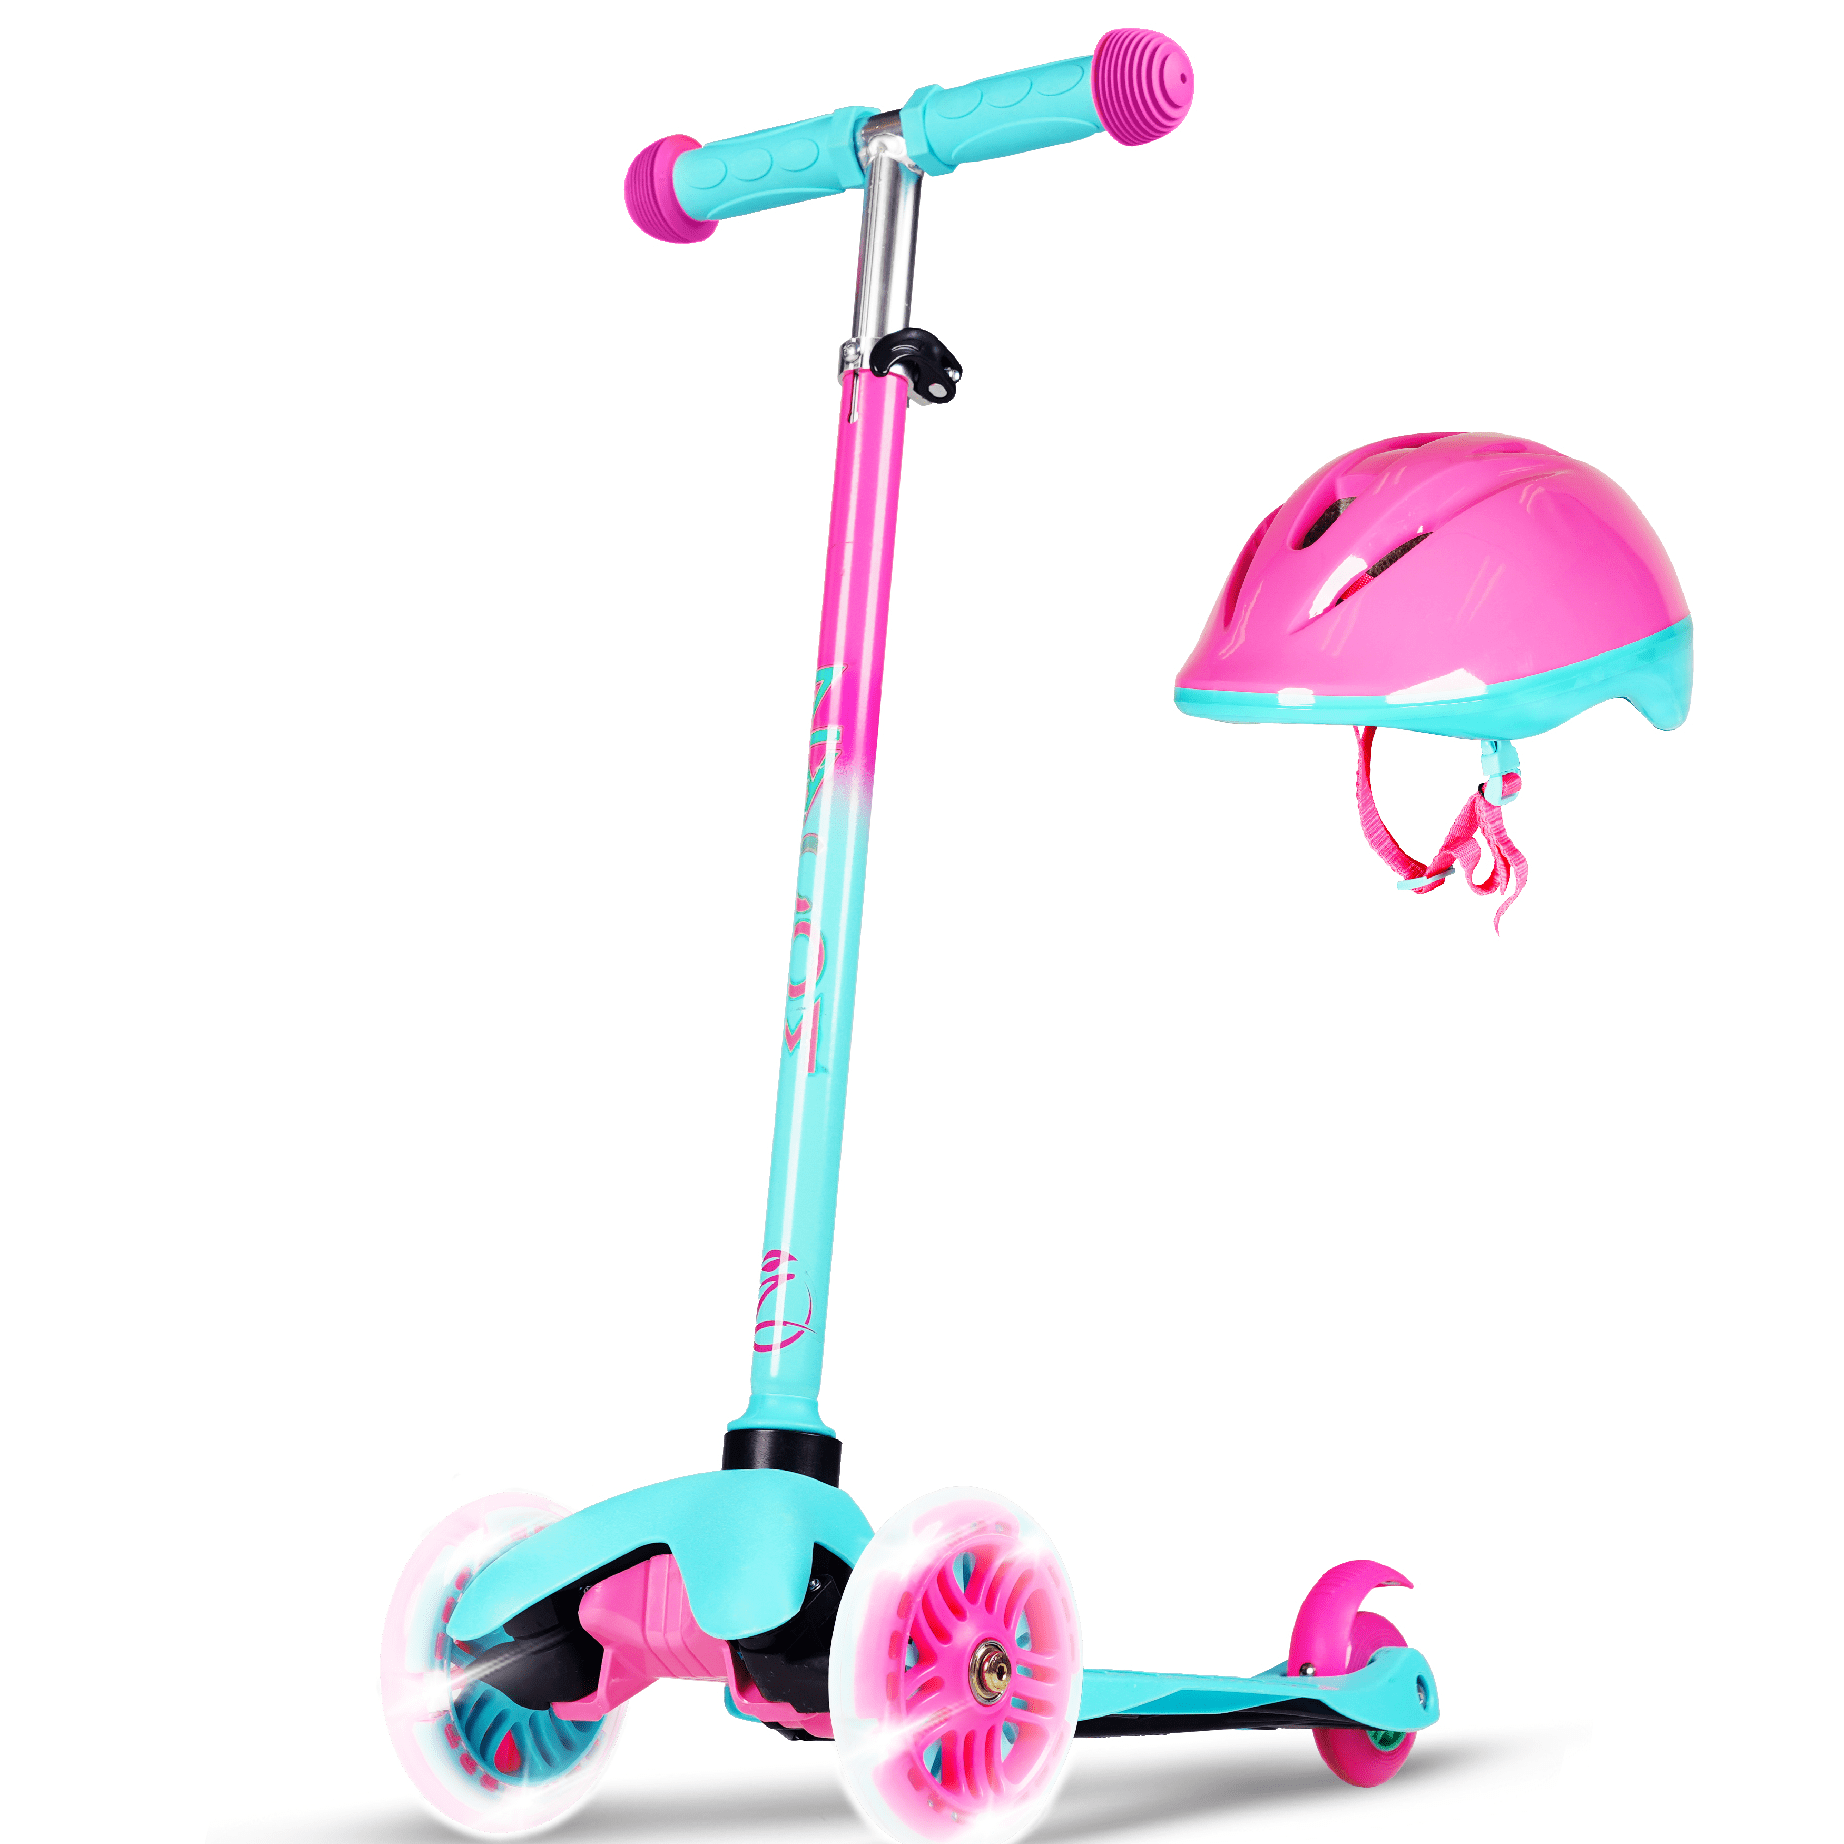 Deluxe 4 LED Wheel Glider Kick-n-Go Lean C Shape stability safety Kids Scooter 